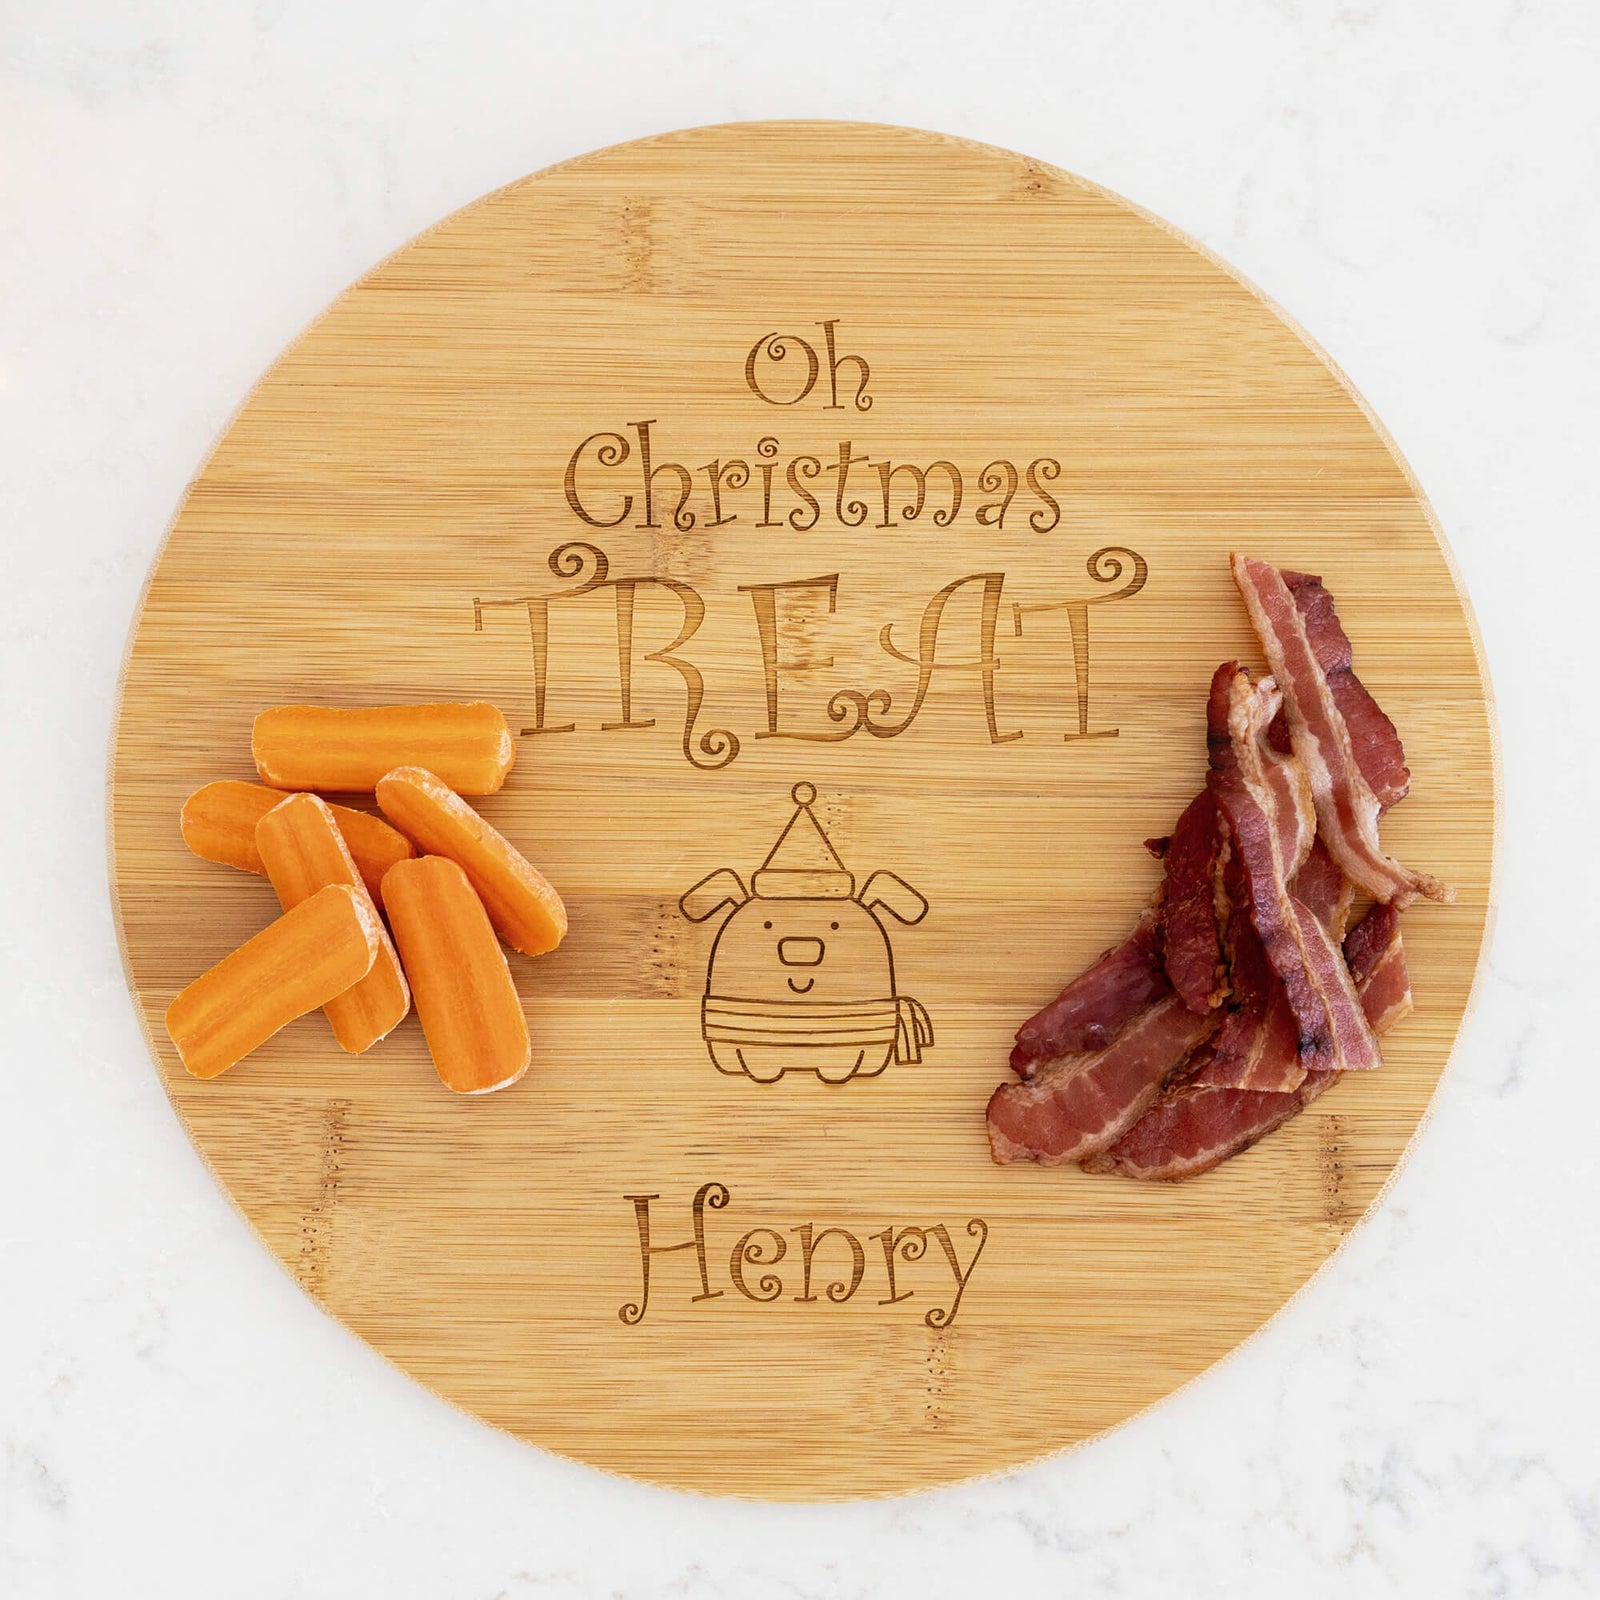 Oh Christmas Treat - PERSONALIZED Pet's Barkuterie Board - Bamboo